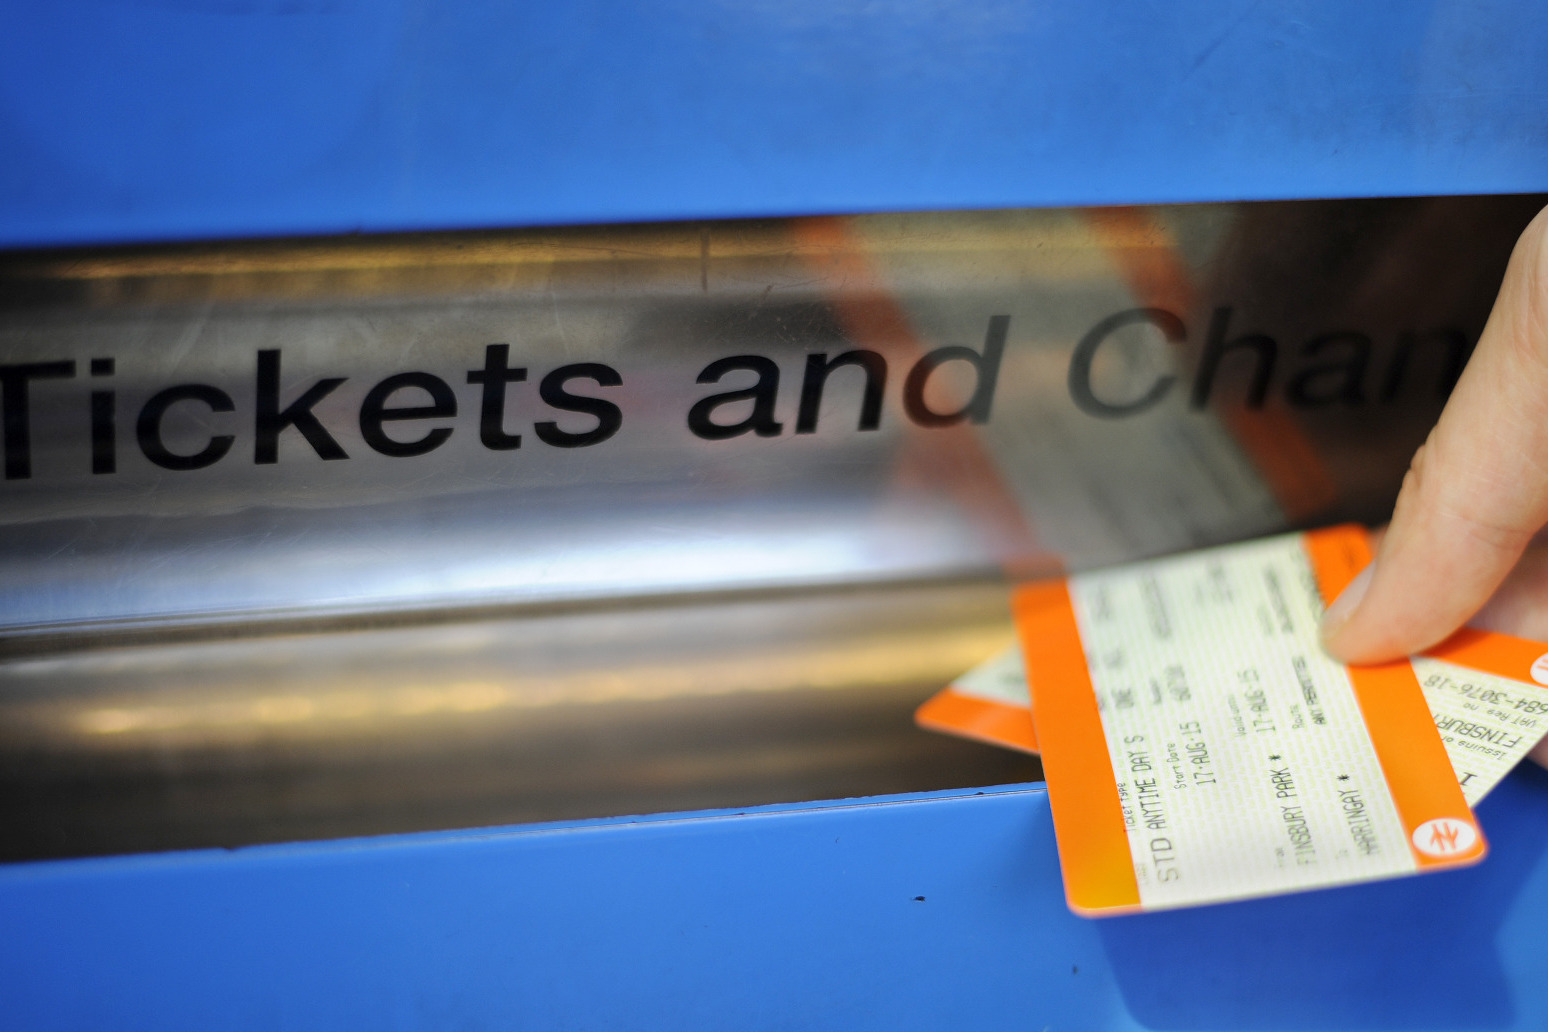 Half price sale on rail fares announced to help with cost of living pressures